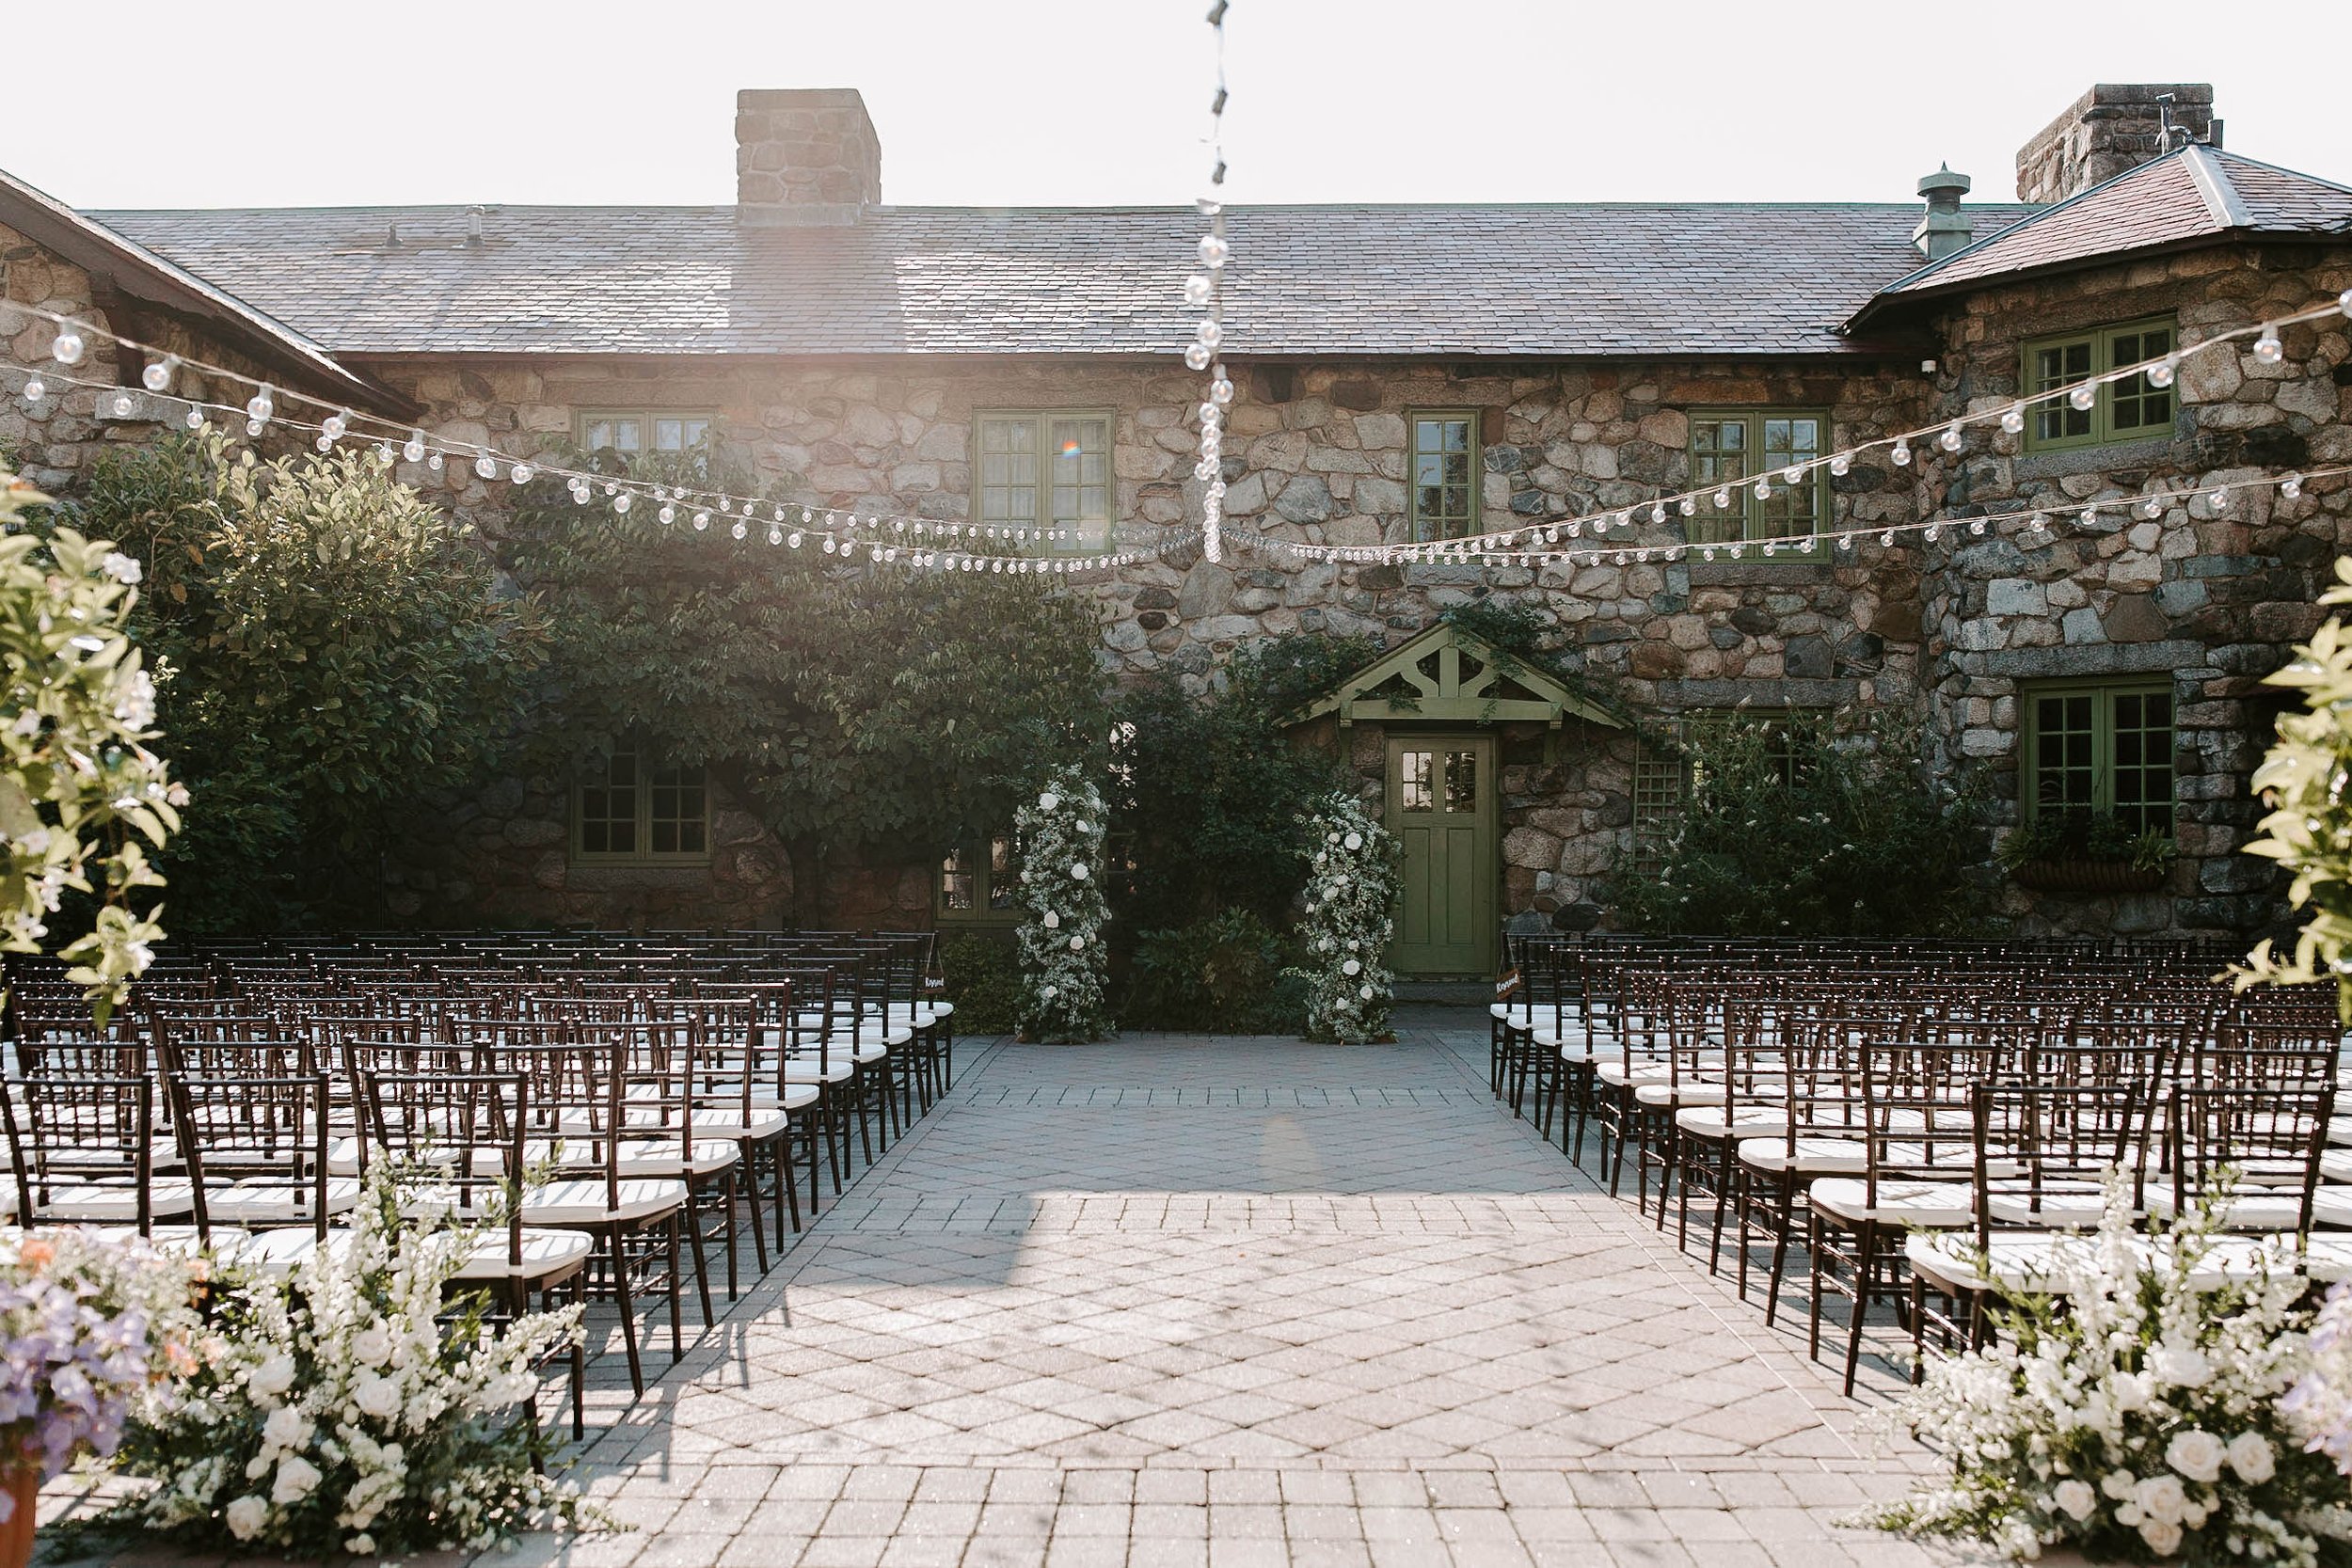 Ceremony setup, wooden seats and white and green floral arrangements